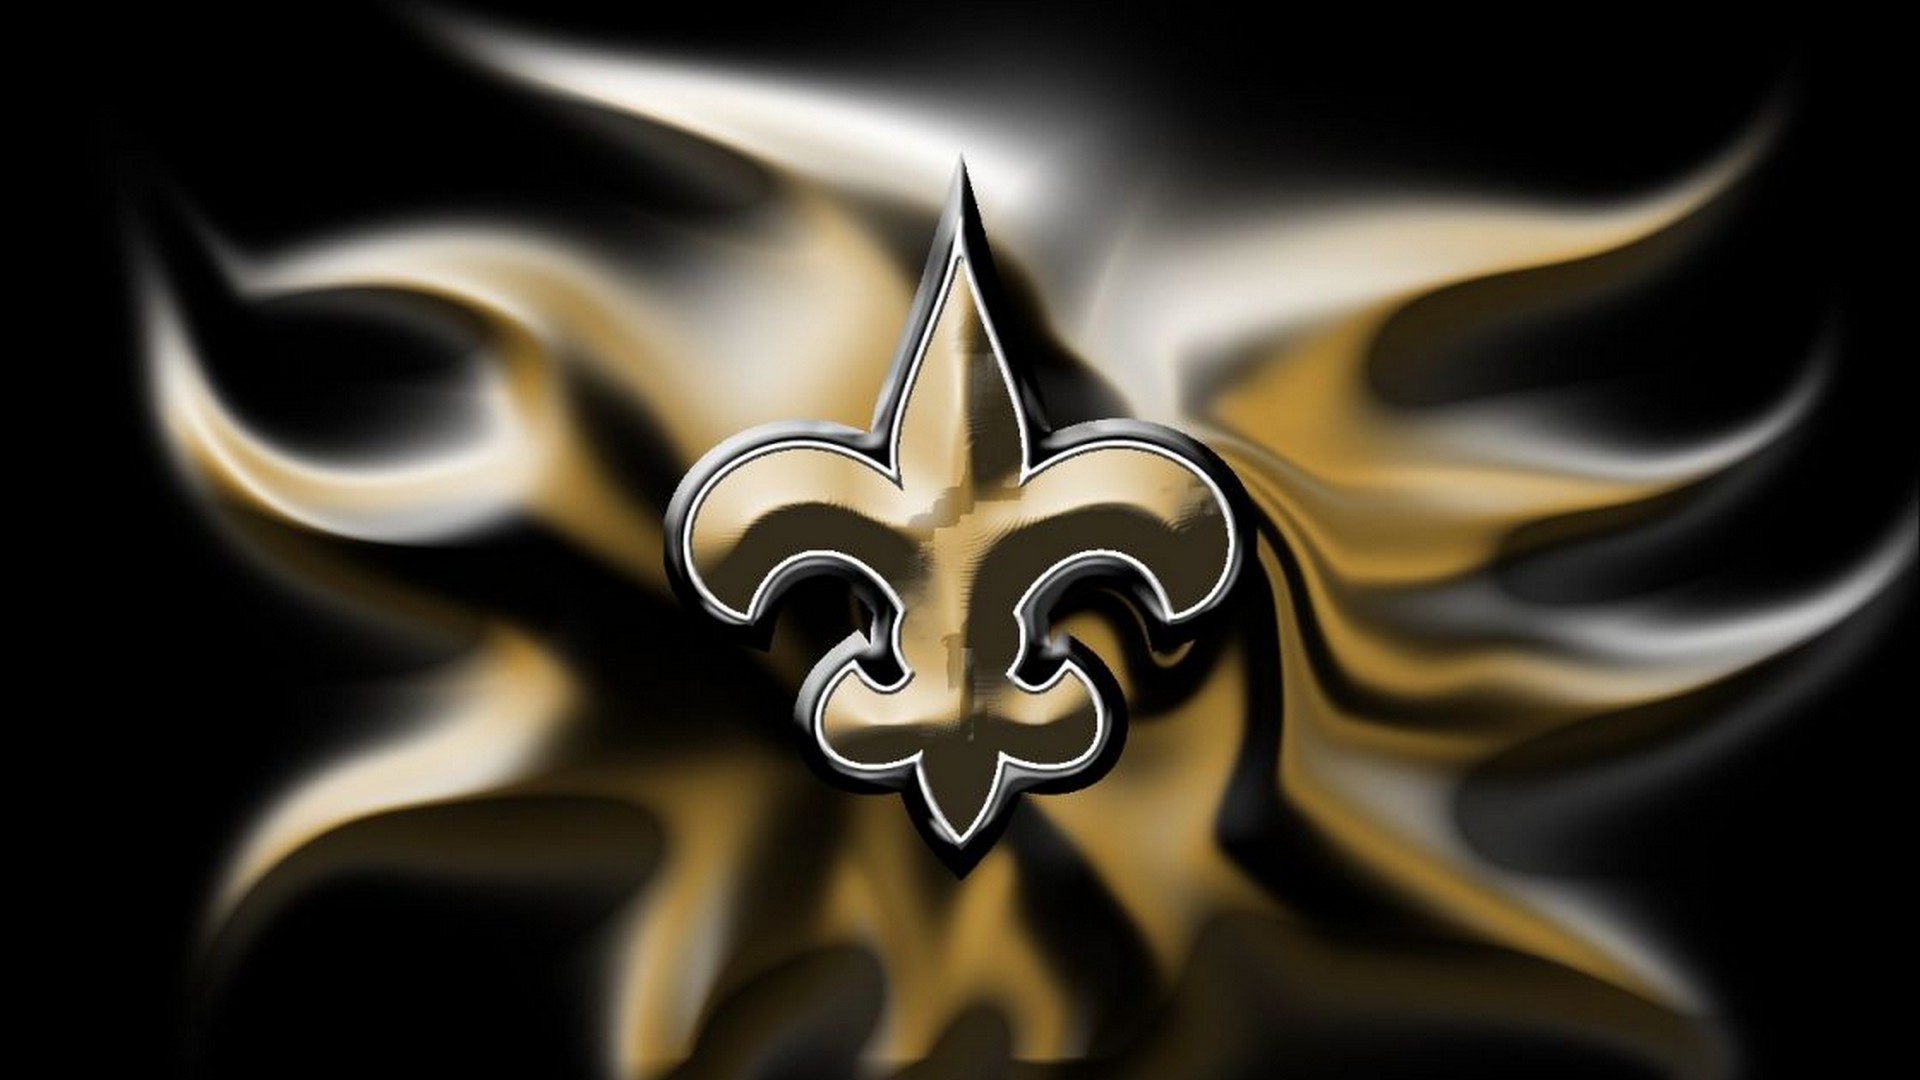 HD New Orleans Saints NFL Backgrounds with resolution 1920x1080 pixel. You can make this wallpaper for your Mac or Windows Desktop Background, iPhone, Android or Tablet and another Smartphone device